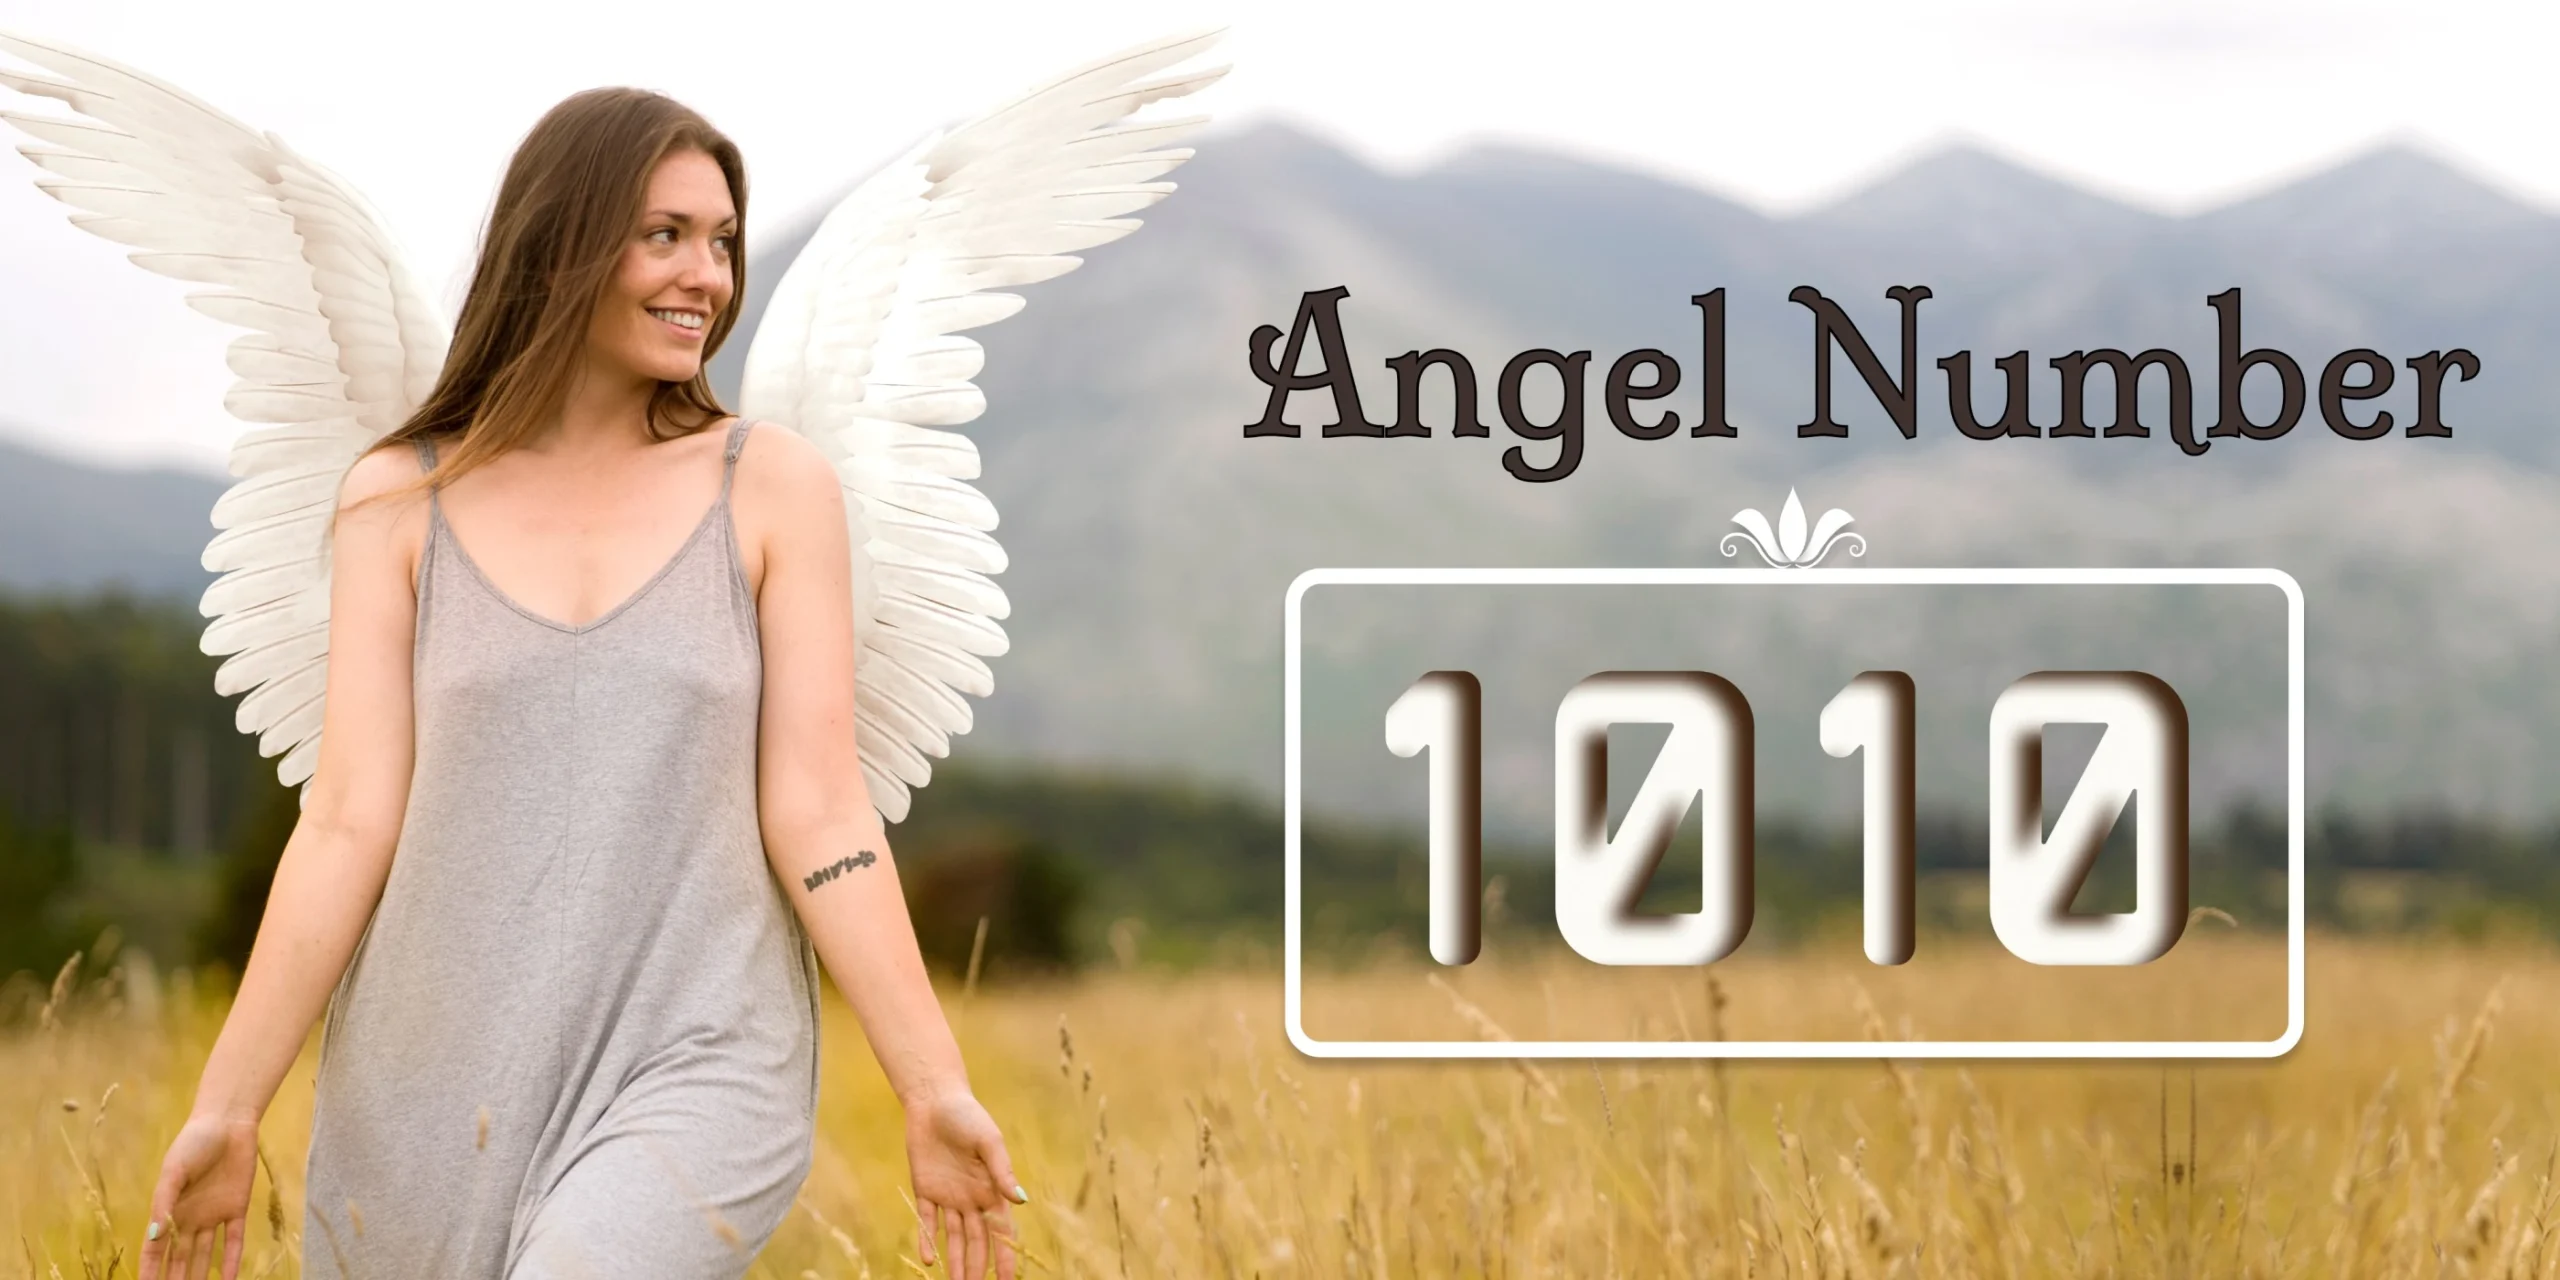 The Angel Number 1010 Meaning in Numerology